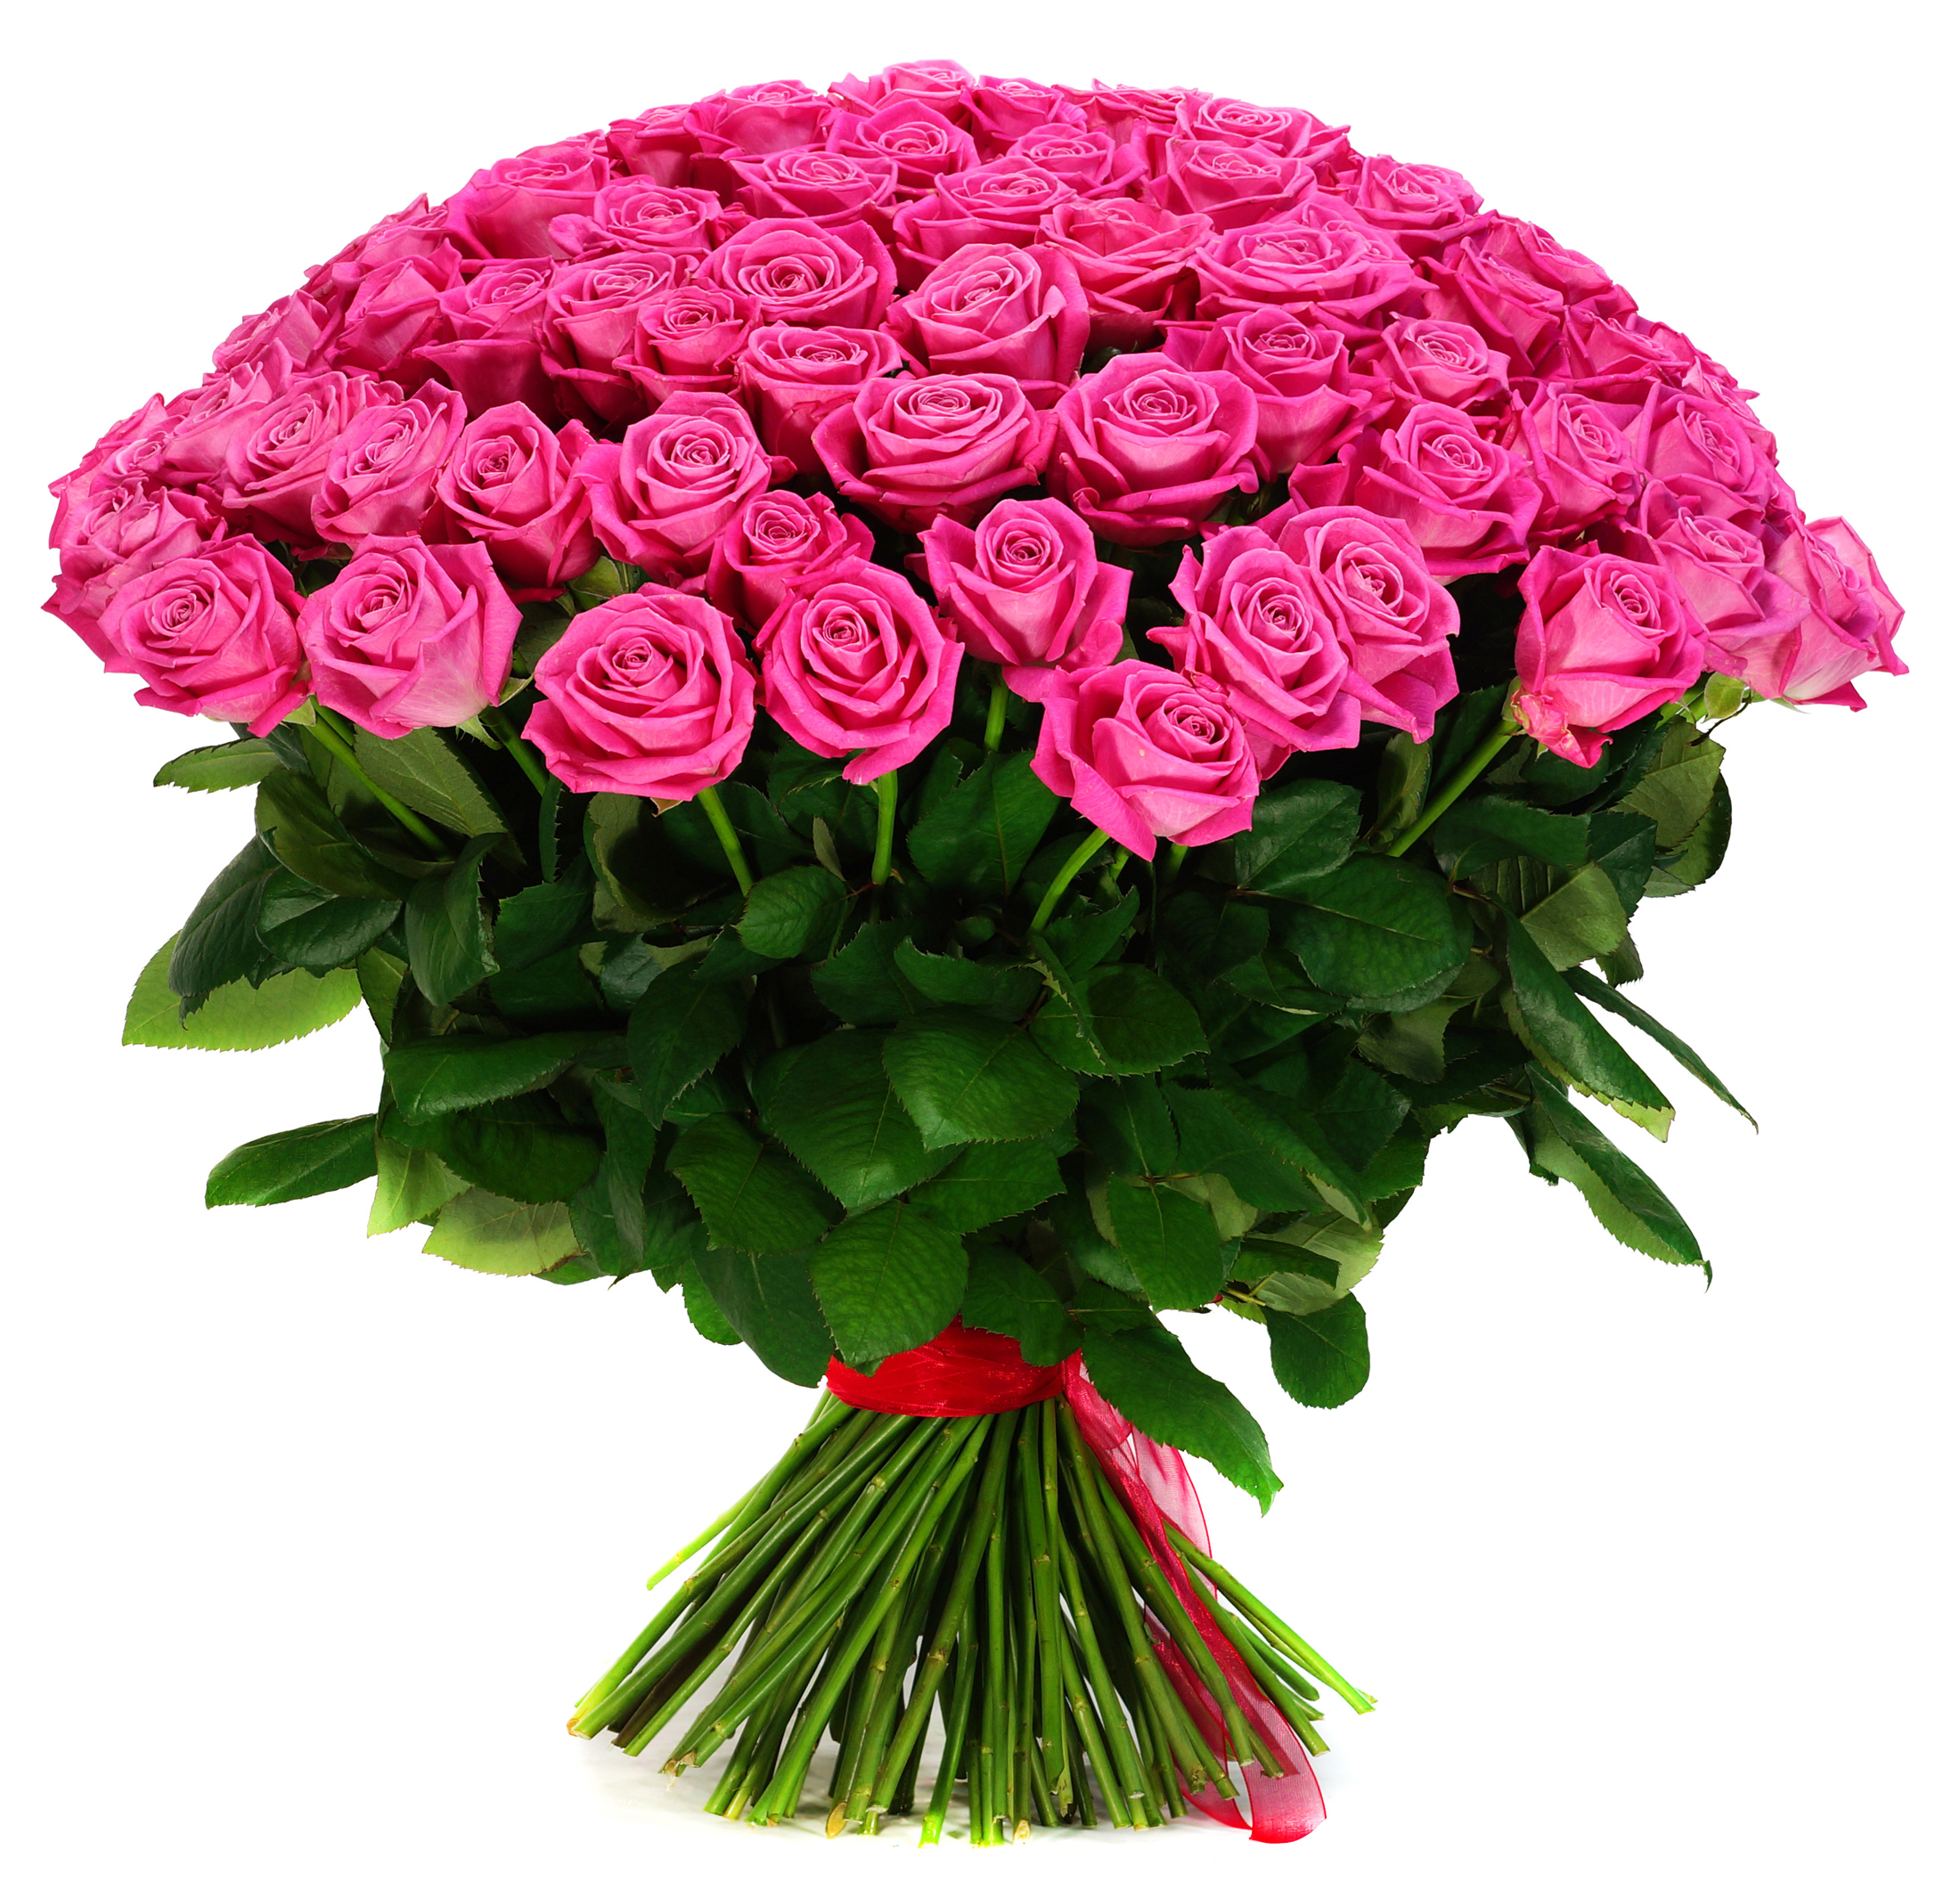 Let a co-worker know she matters with a purple pink rose bouquet from CFM